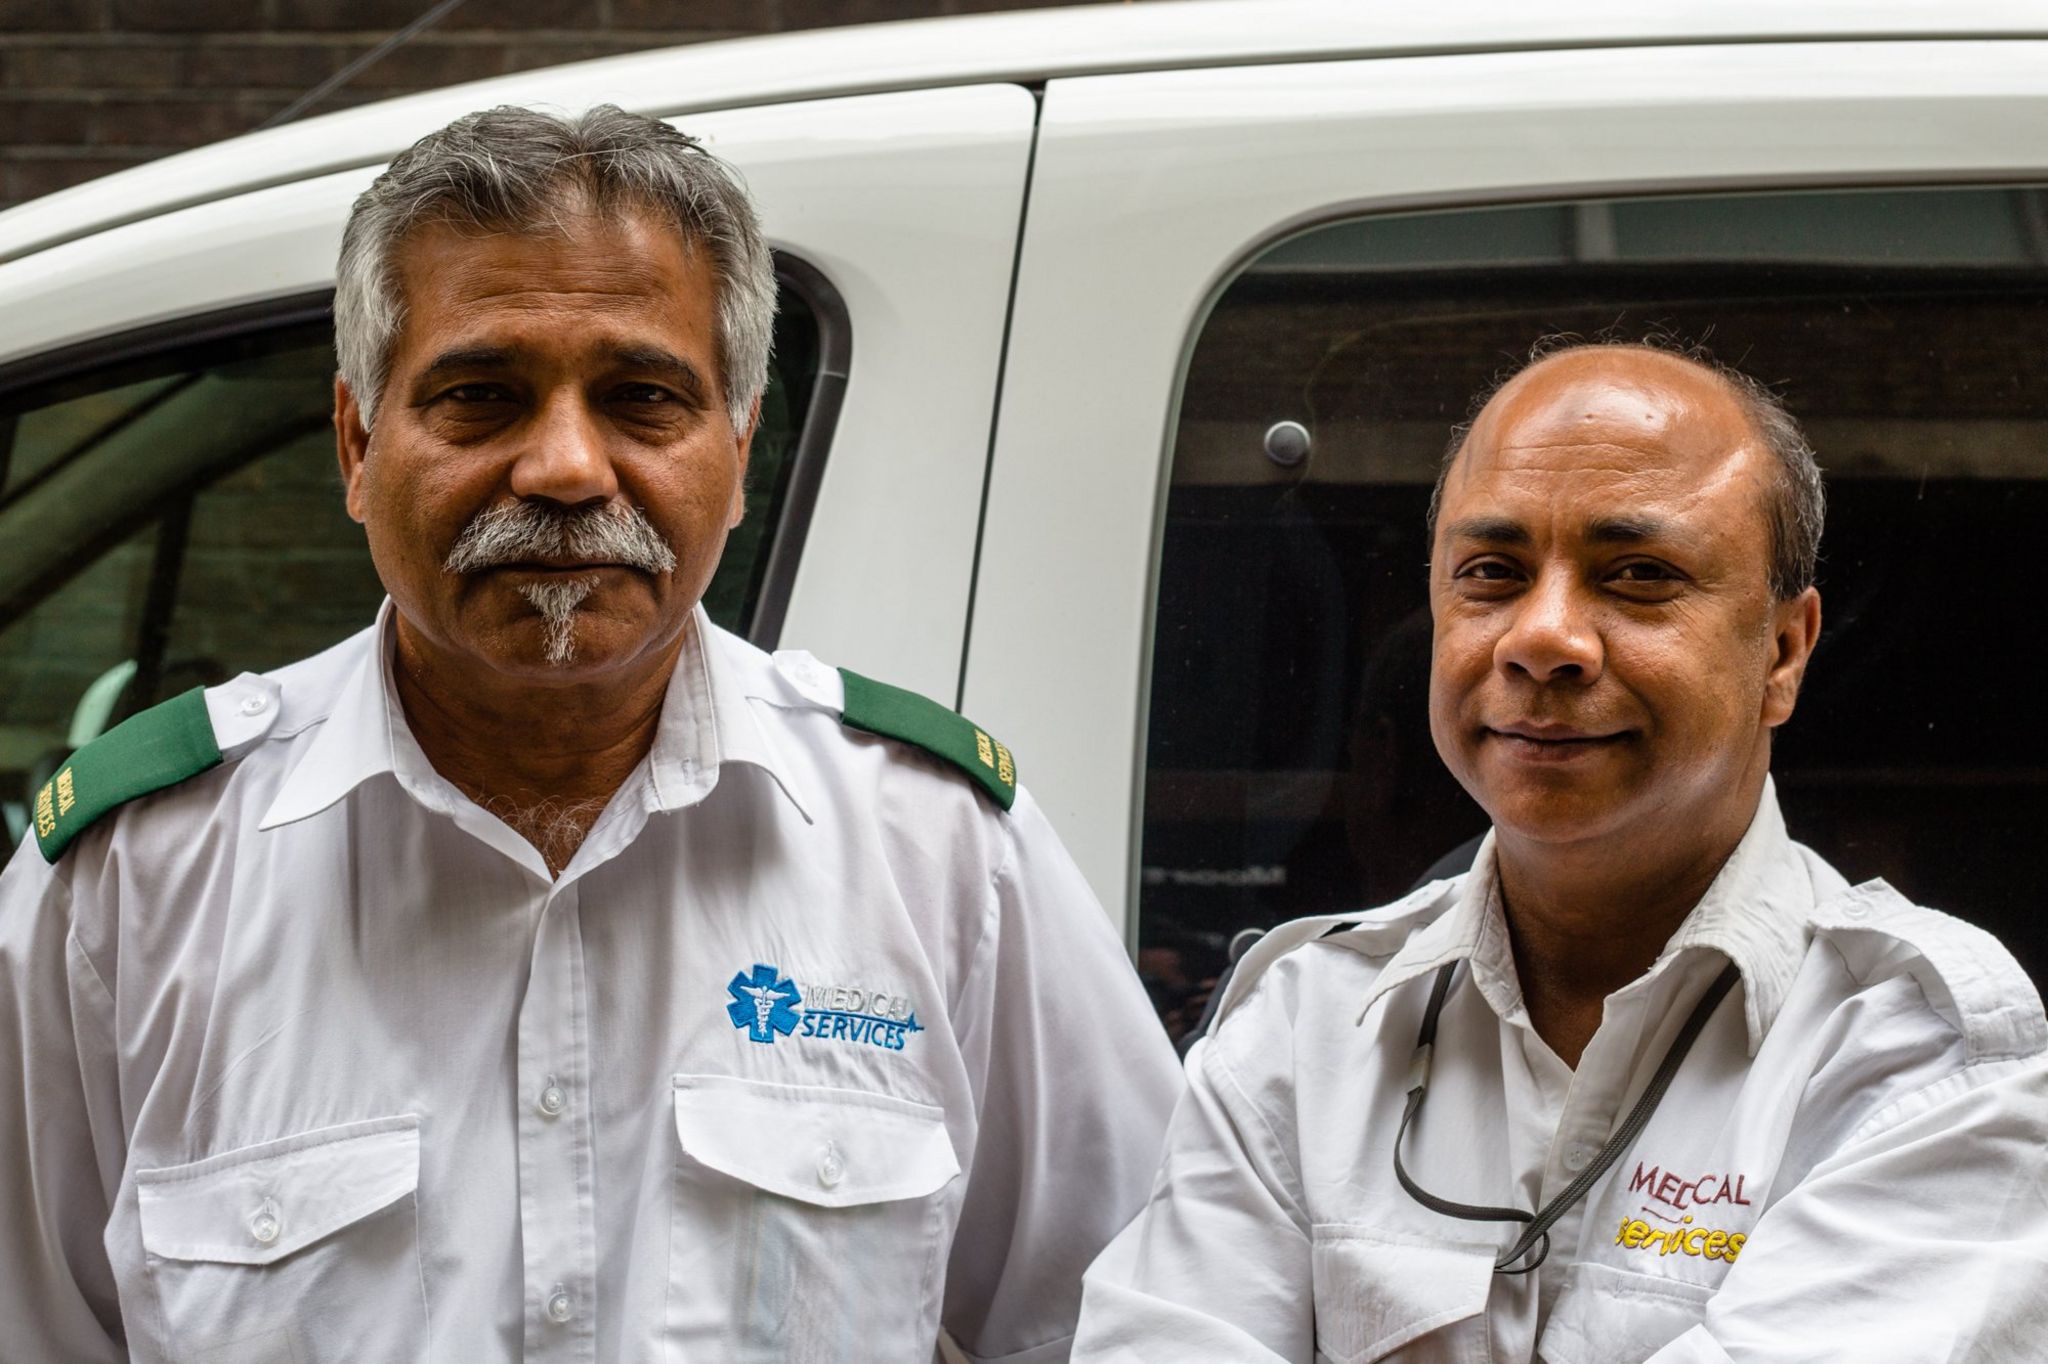 Khan (left) and Islam, Patient Transporters